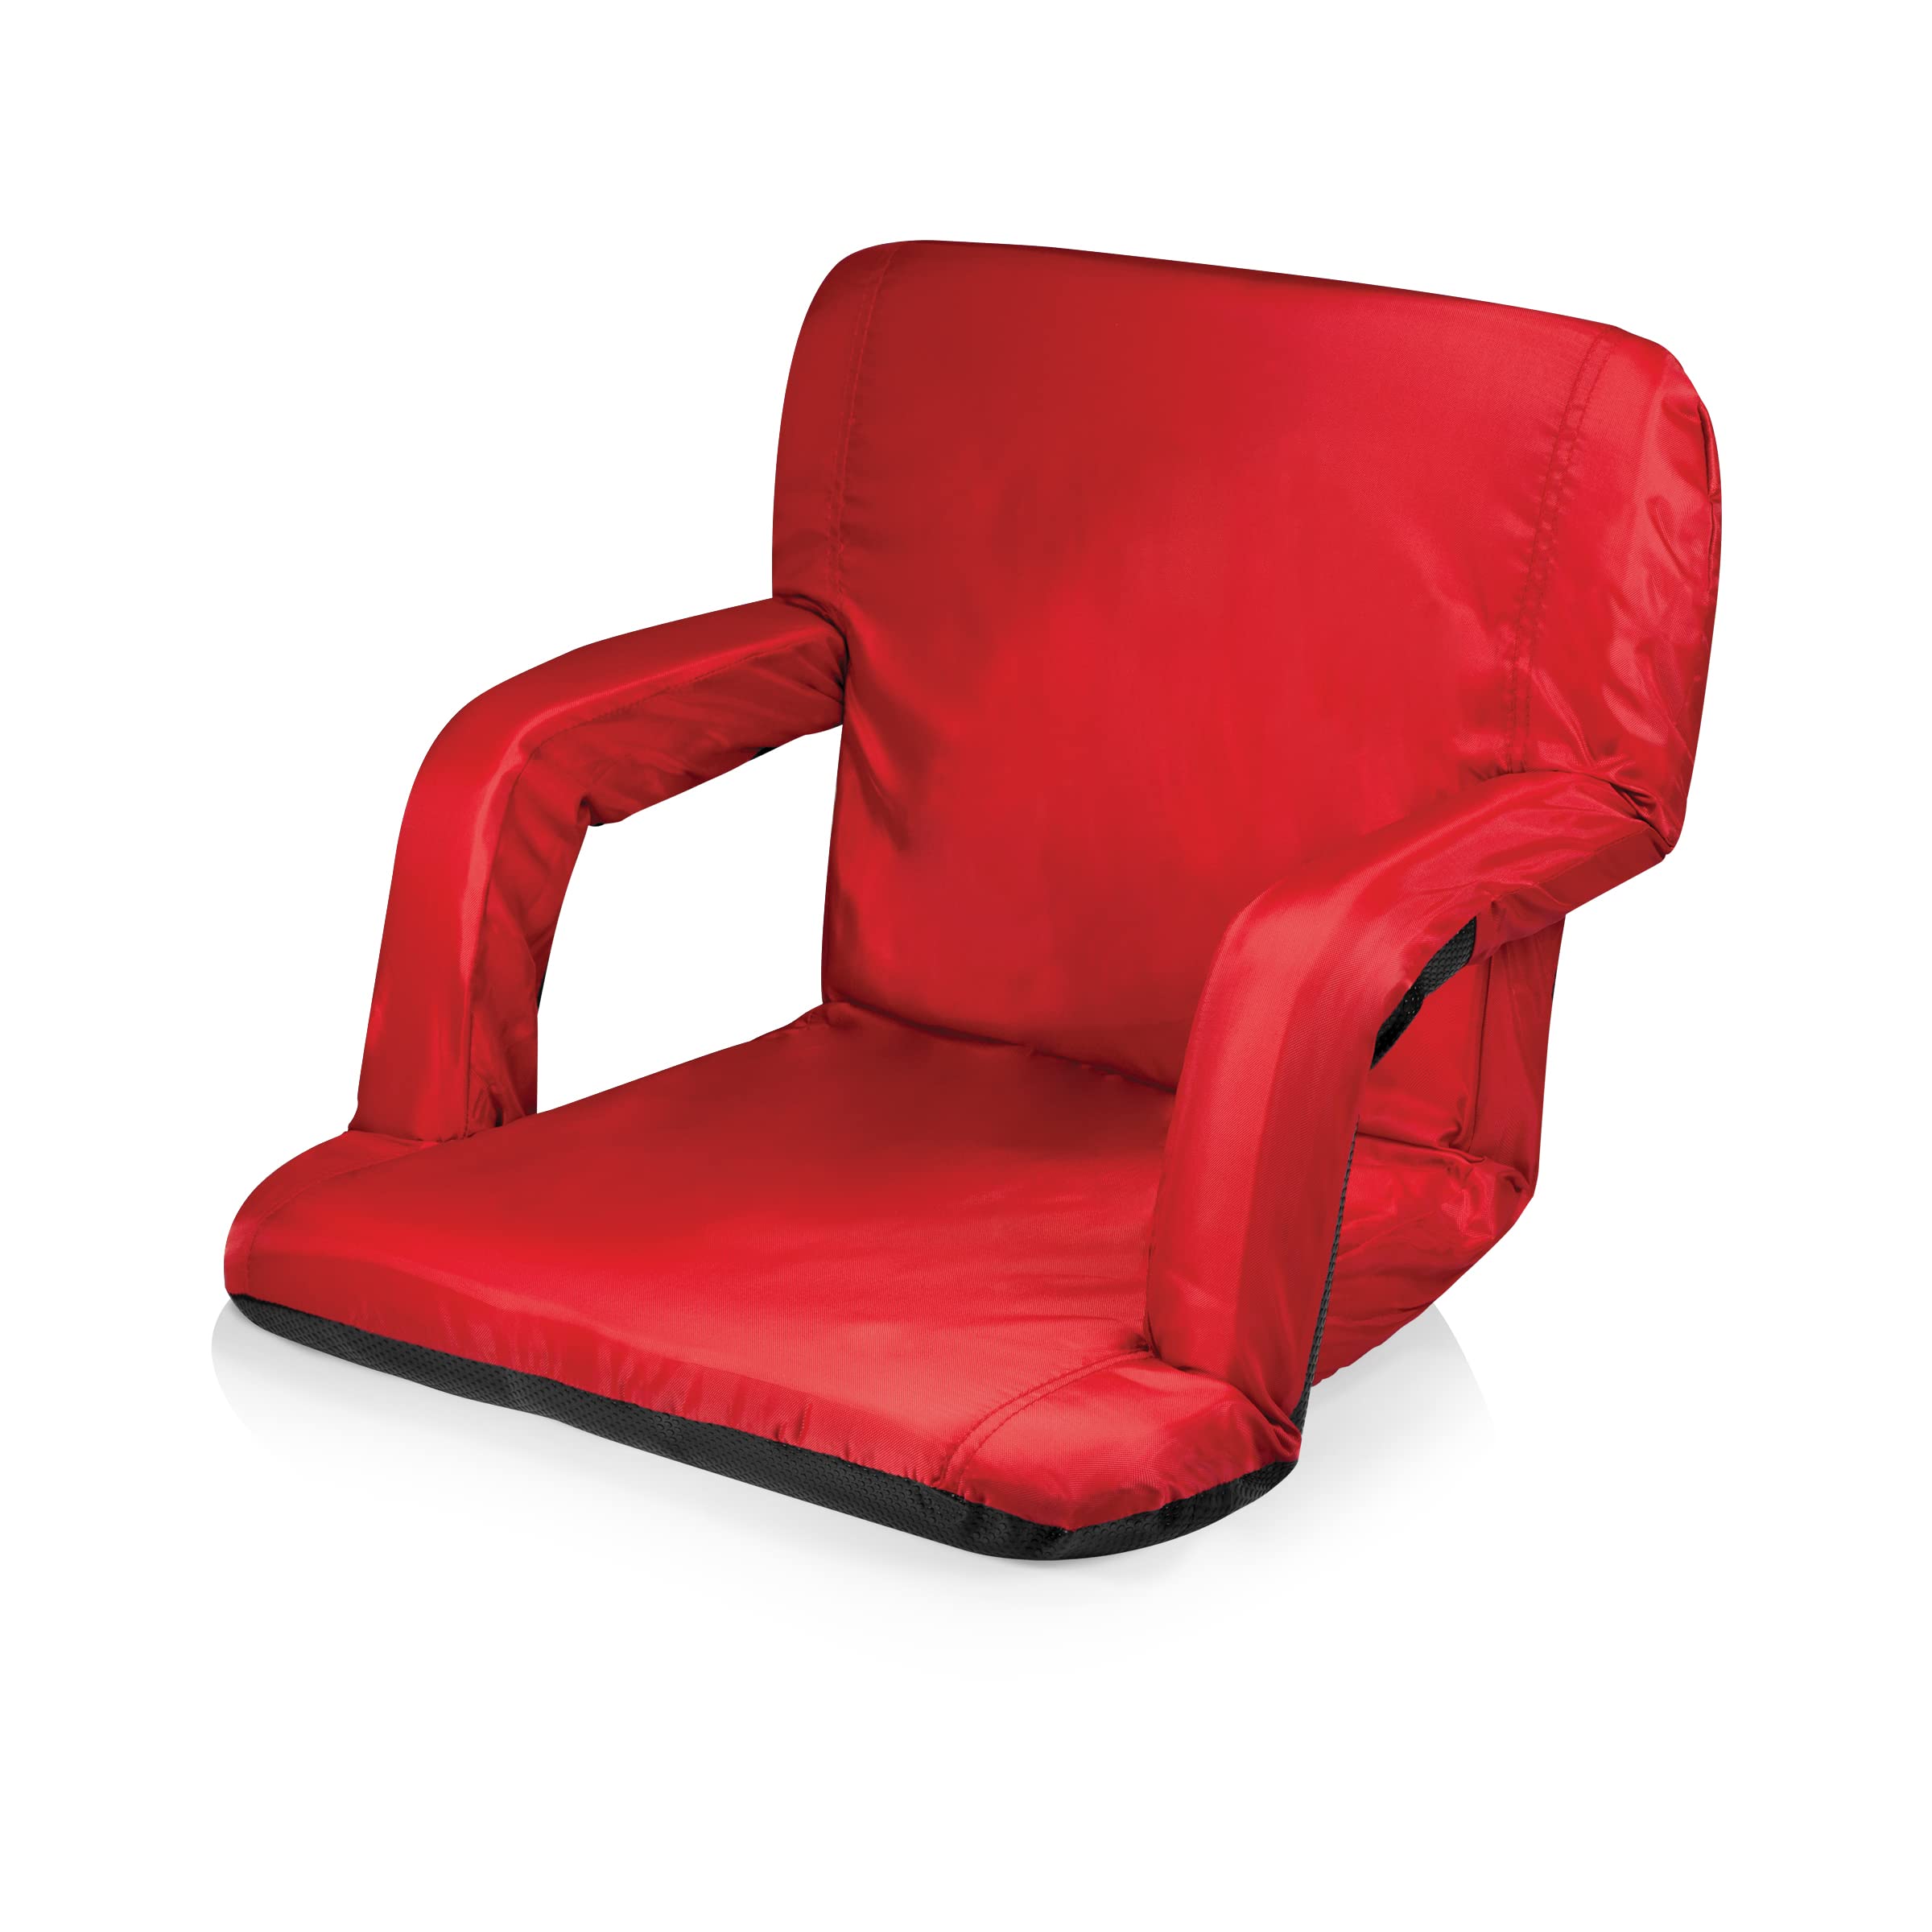 Picnic Time ONIVA - a Picnic Time brand Ventura Reclining Stadium Seat with Back Support - Bleacher Seat - Beach Floor Chair, (Red)